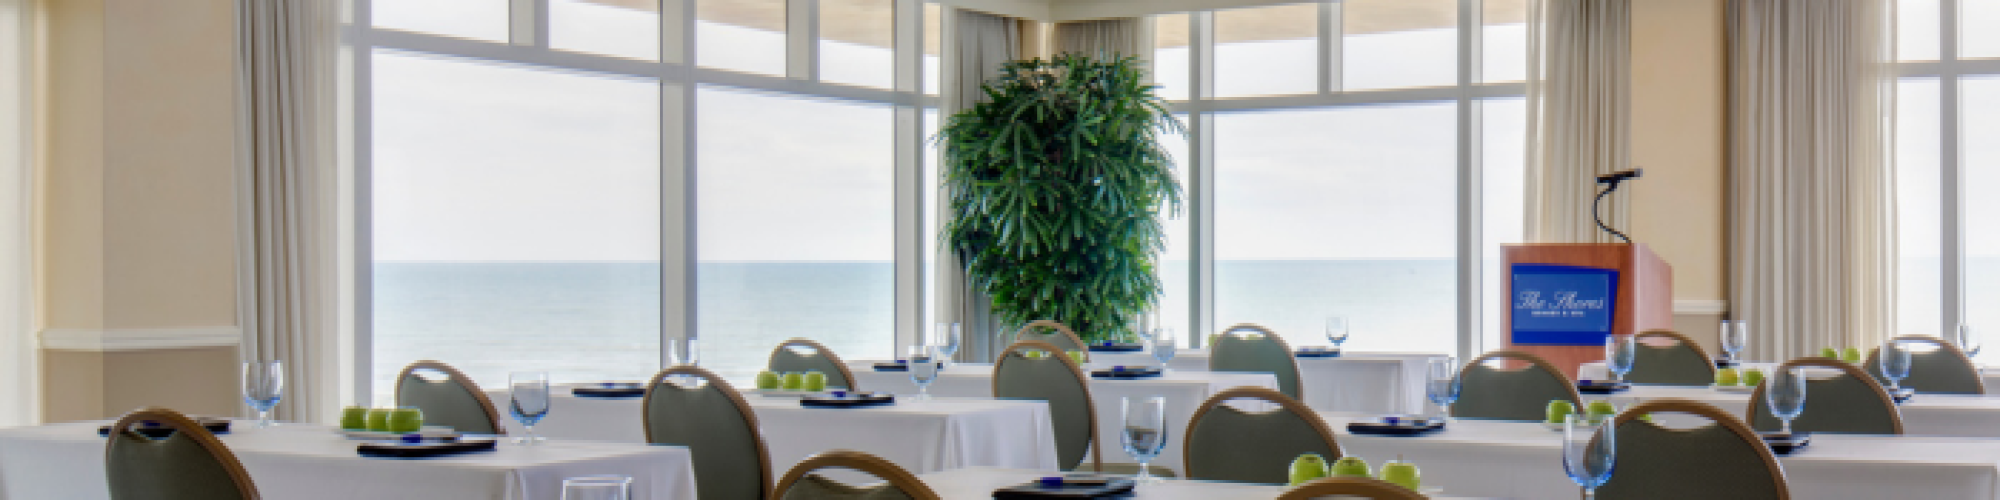 The image shows a conference room setup with tables, chairs, green apples, notepads, and glasses, overlooking a scenic ocean view through large windows.